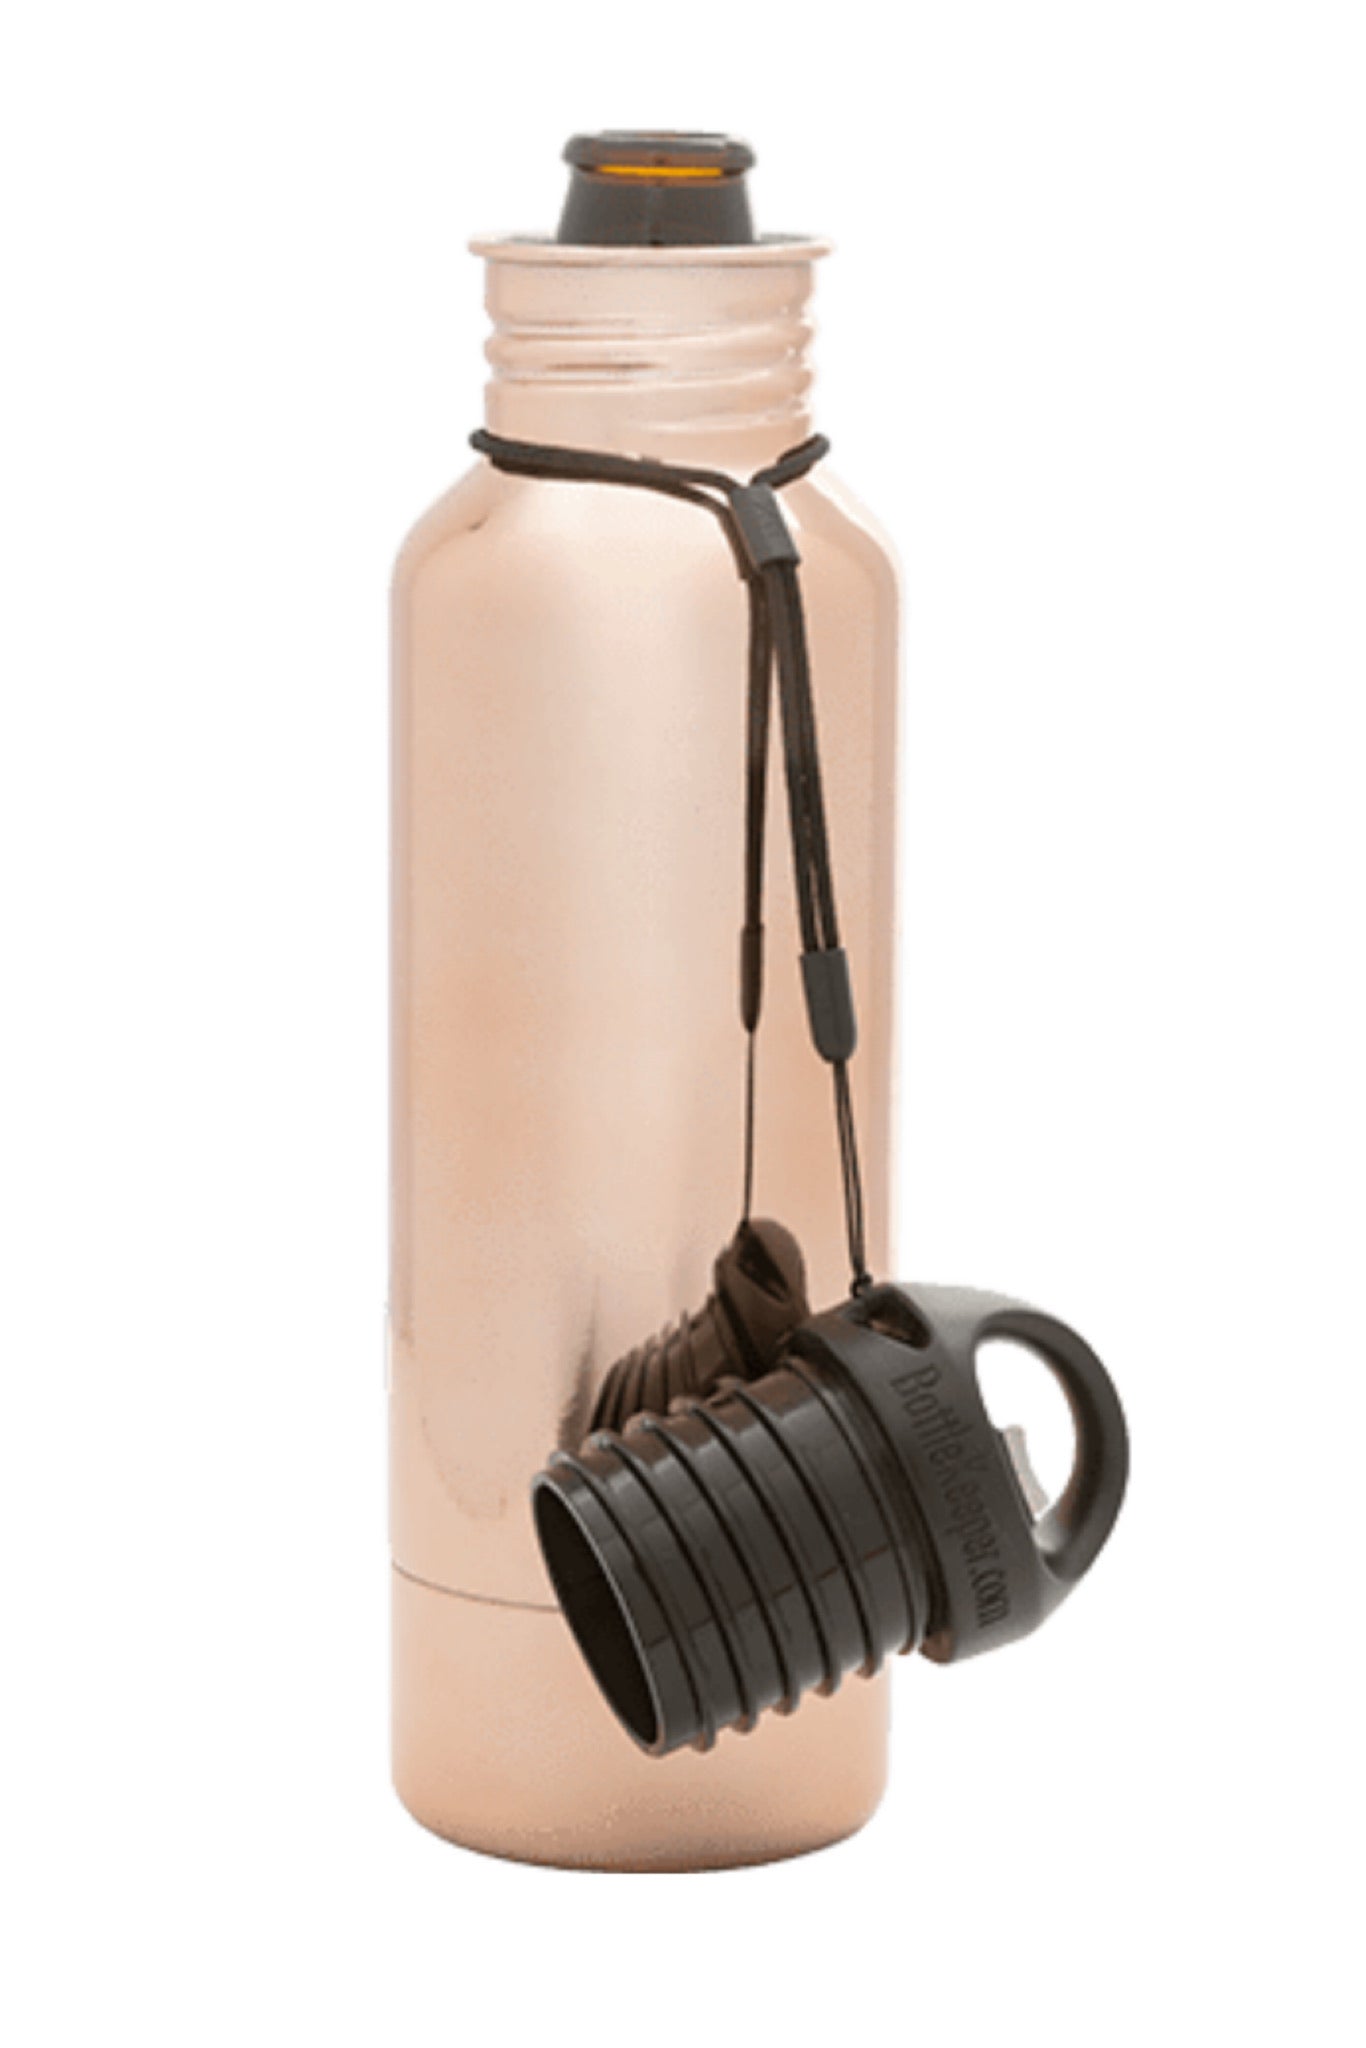  BottleKeeper - The Standard 2.0 - The Original Stainless Steel  Bottle Holder and Insulator to Keep Your Beer Colder (Coral): Home & Kitchen